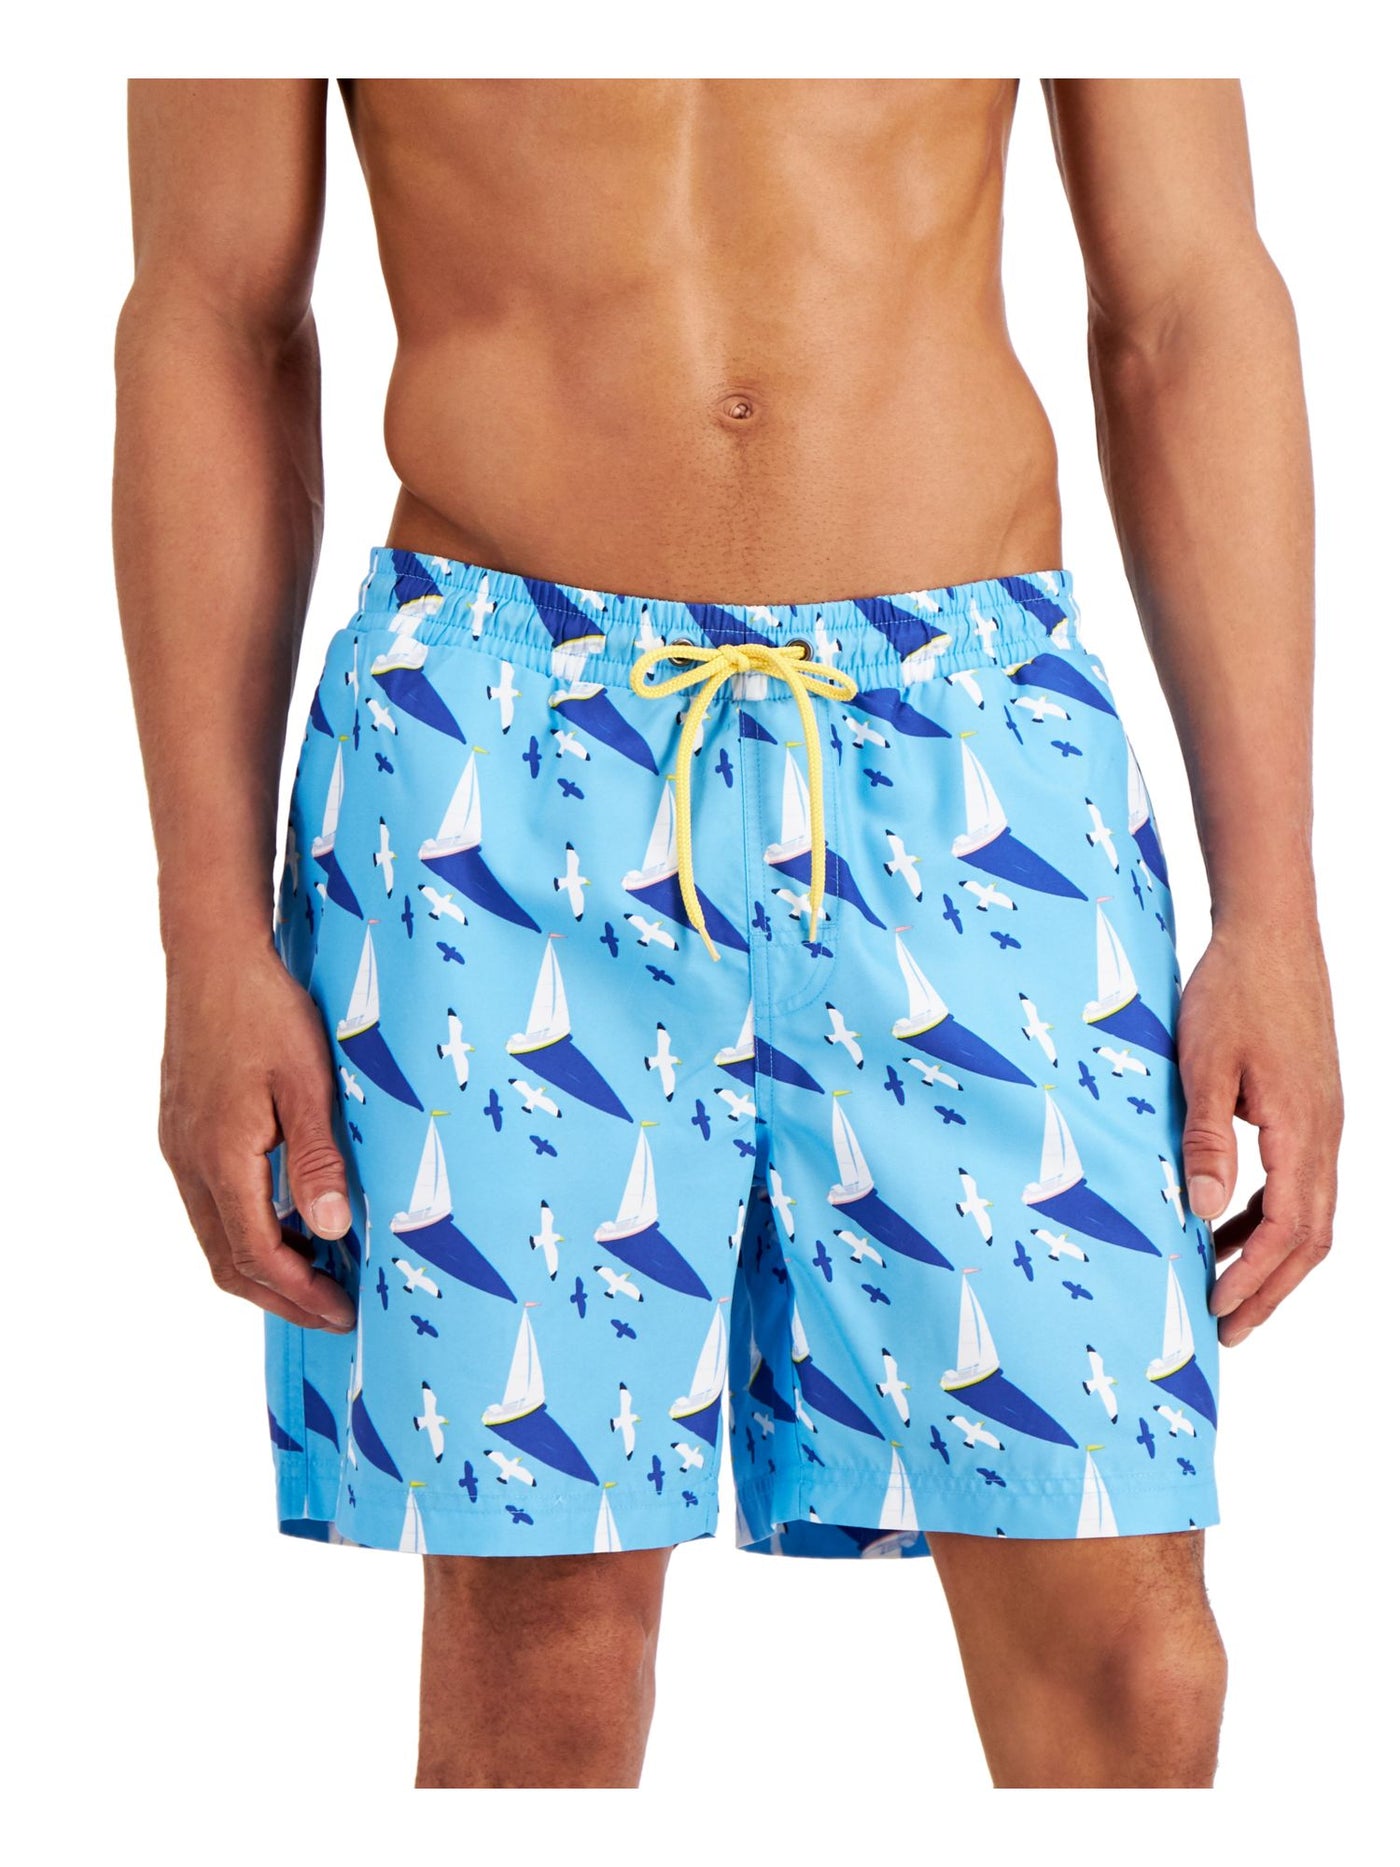 CLUBROOM Mens Light Blue Printed Classic Fit Quick-Dry Athletic Shorts XXL